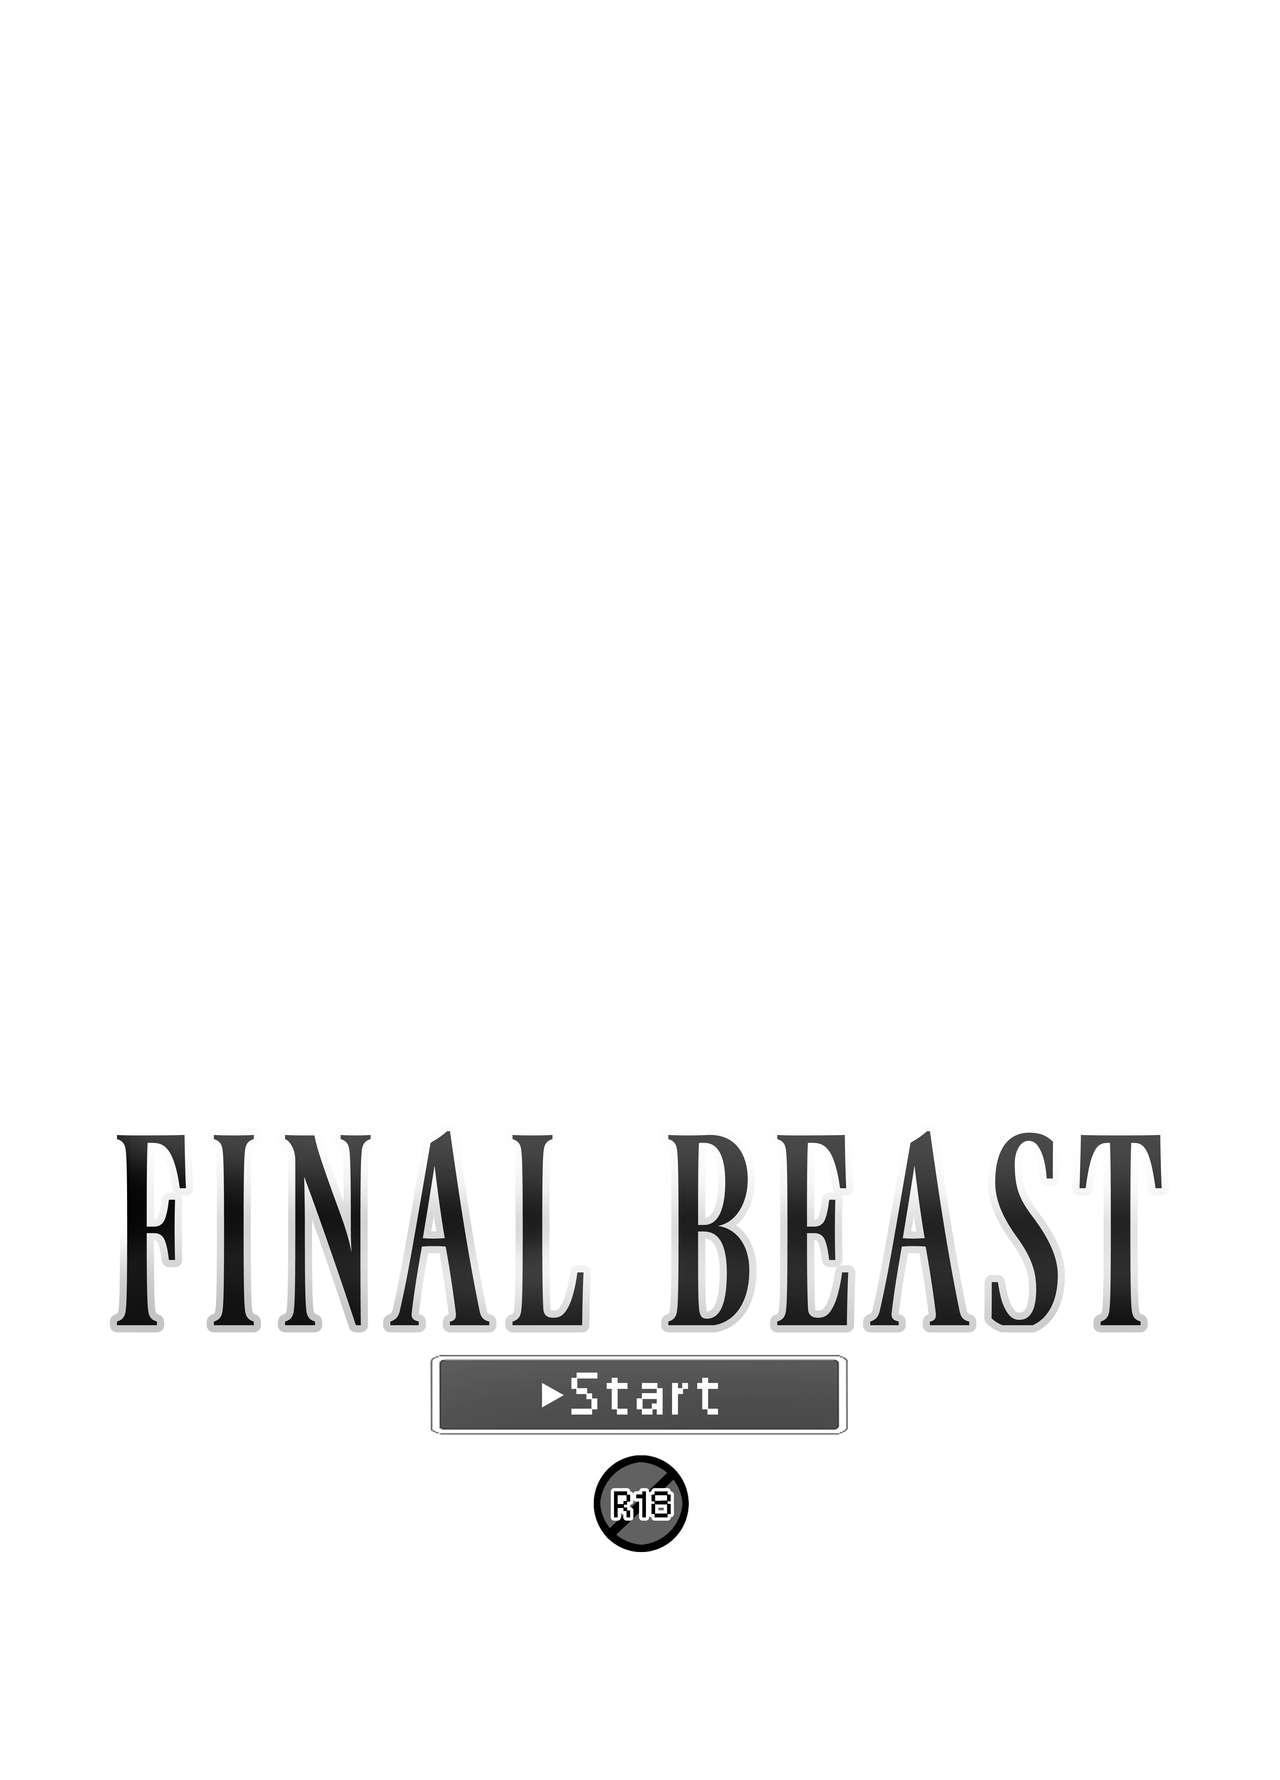 Doggie Style Porn FINAL BEAST - Final fantasy vii Final fantasy Unshaved - Page 3